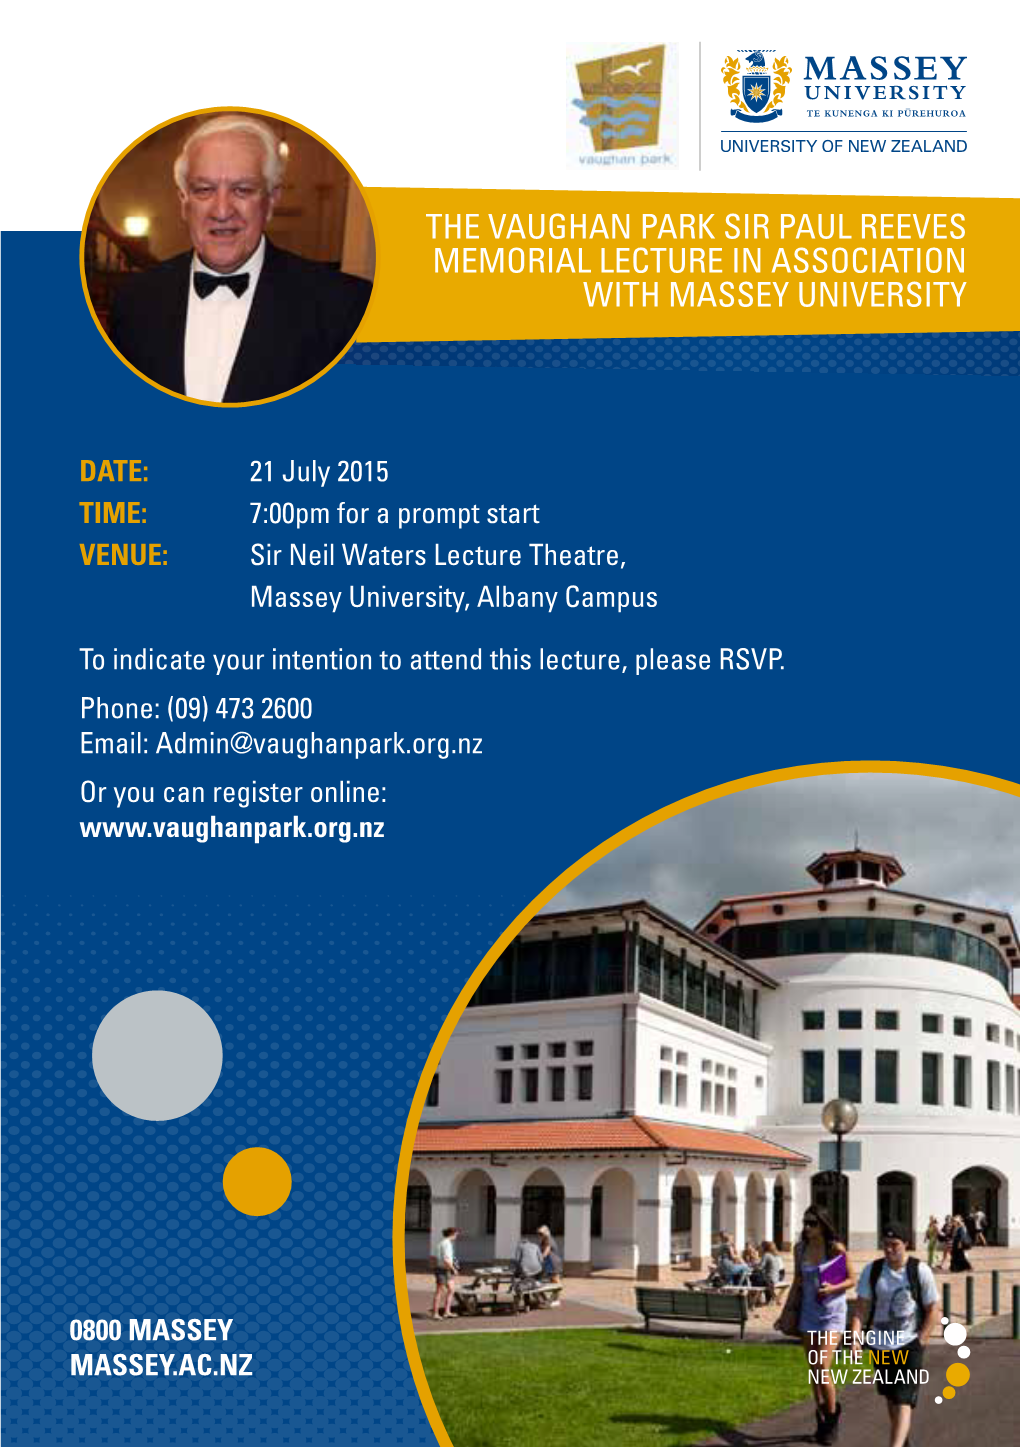 The Vaughan Park Sir Paul Reeves Memorial Lecture in Association with Massey University